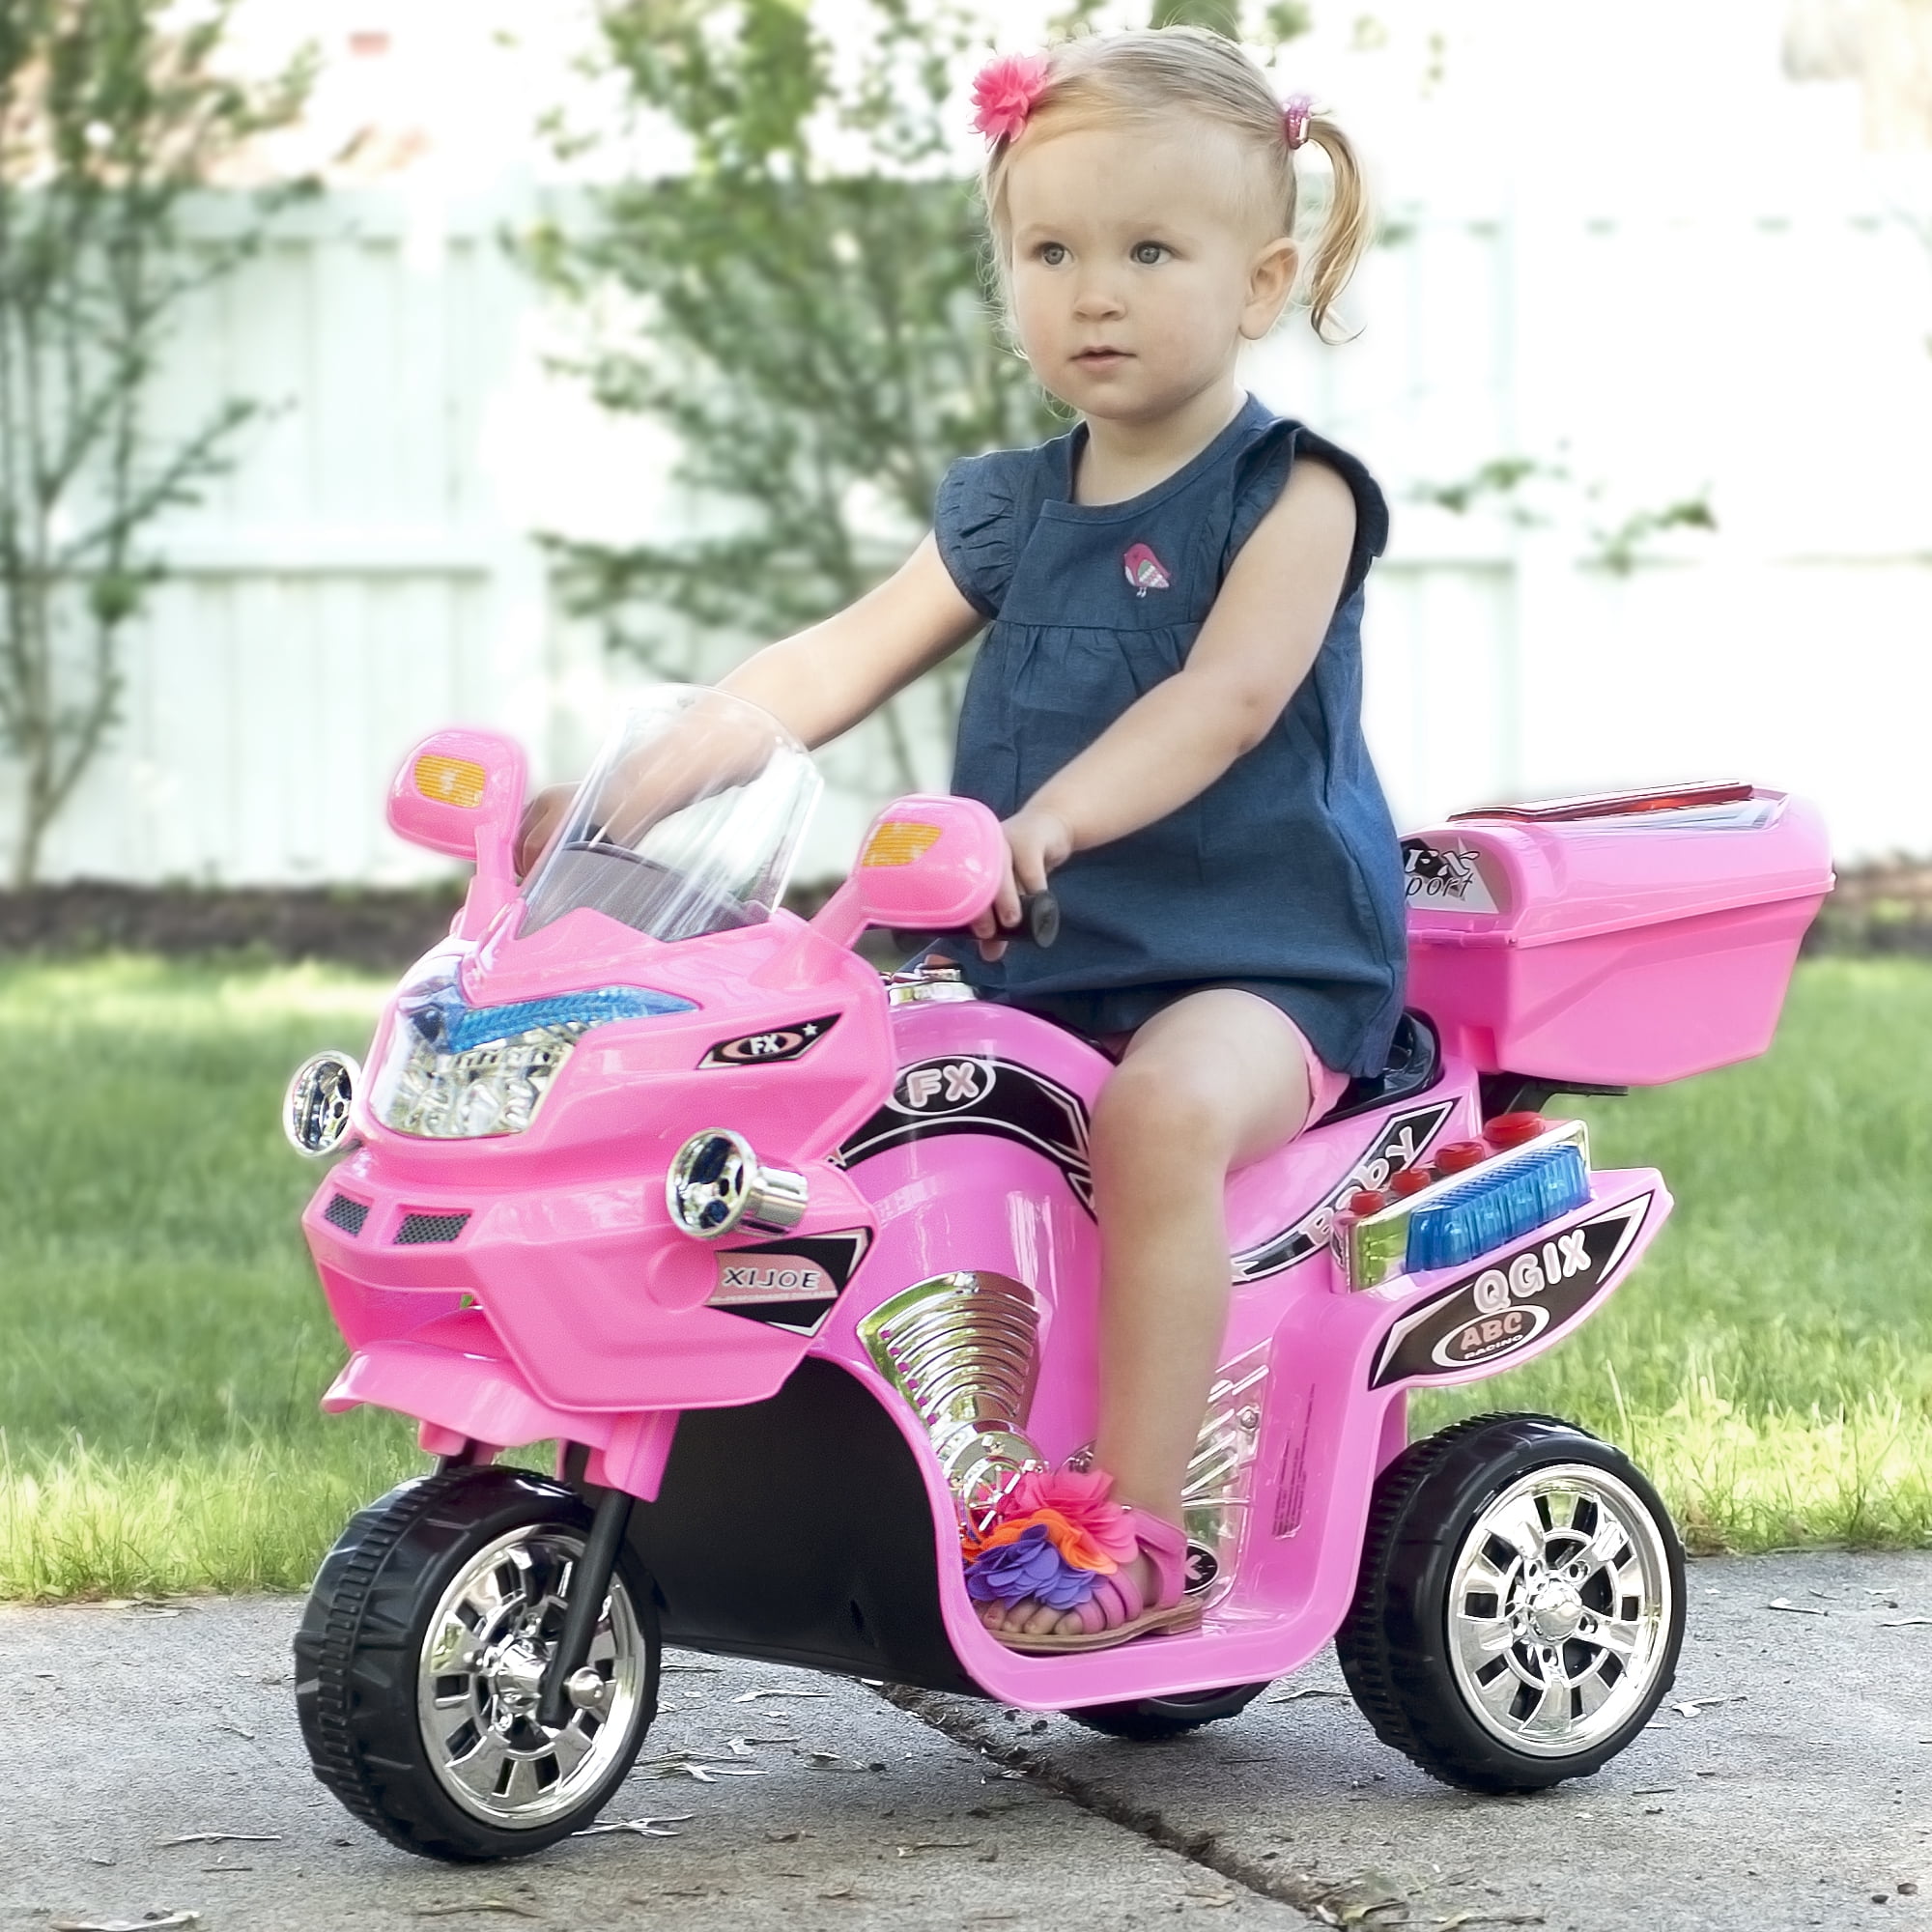 toy motorcycles for kids